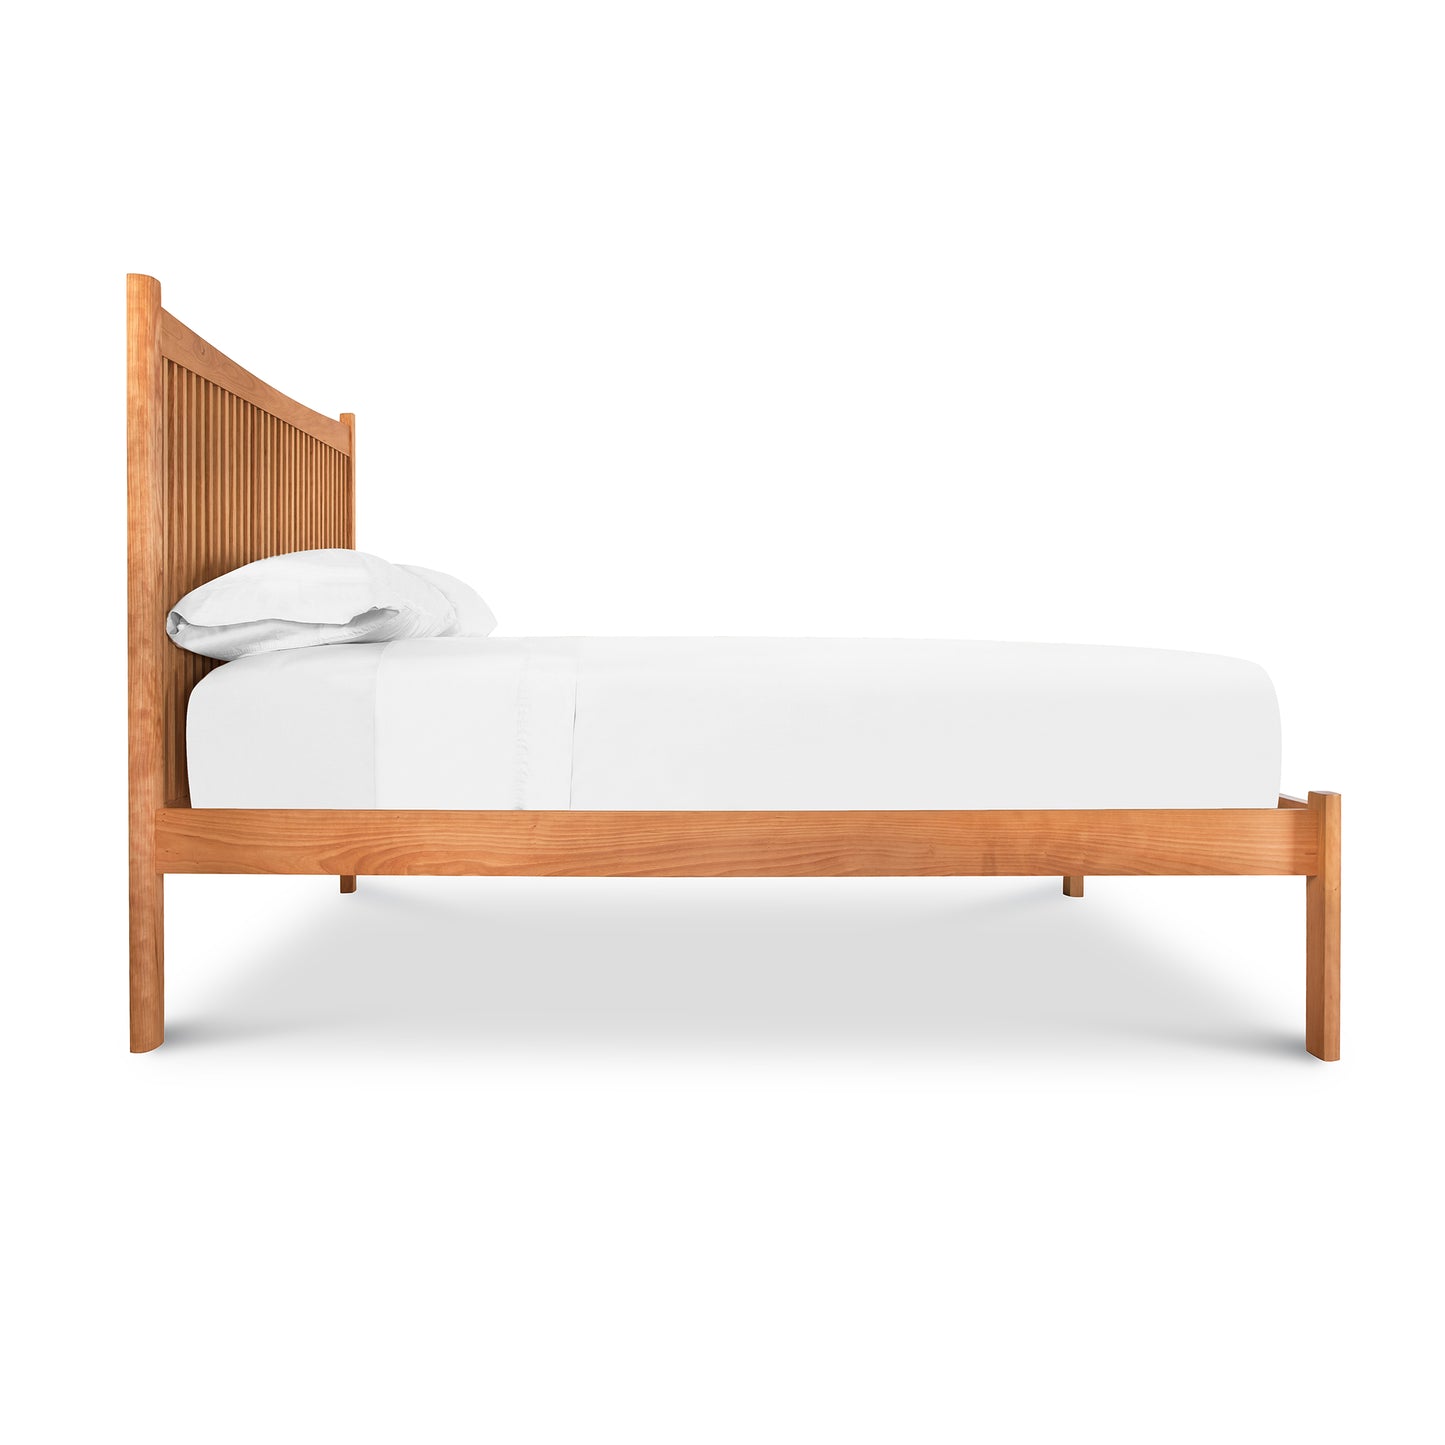 A modern Heartwood Shaker Low Footboard Bed by Vermont Furniture Designs with a slatted headboard and Arts and Crafts styling, featuring a white mattress and a single pillow, isolated on a white background.